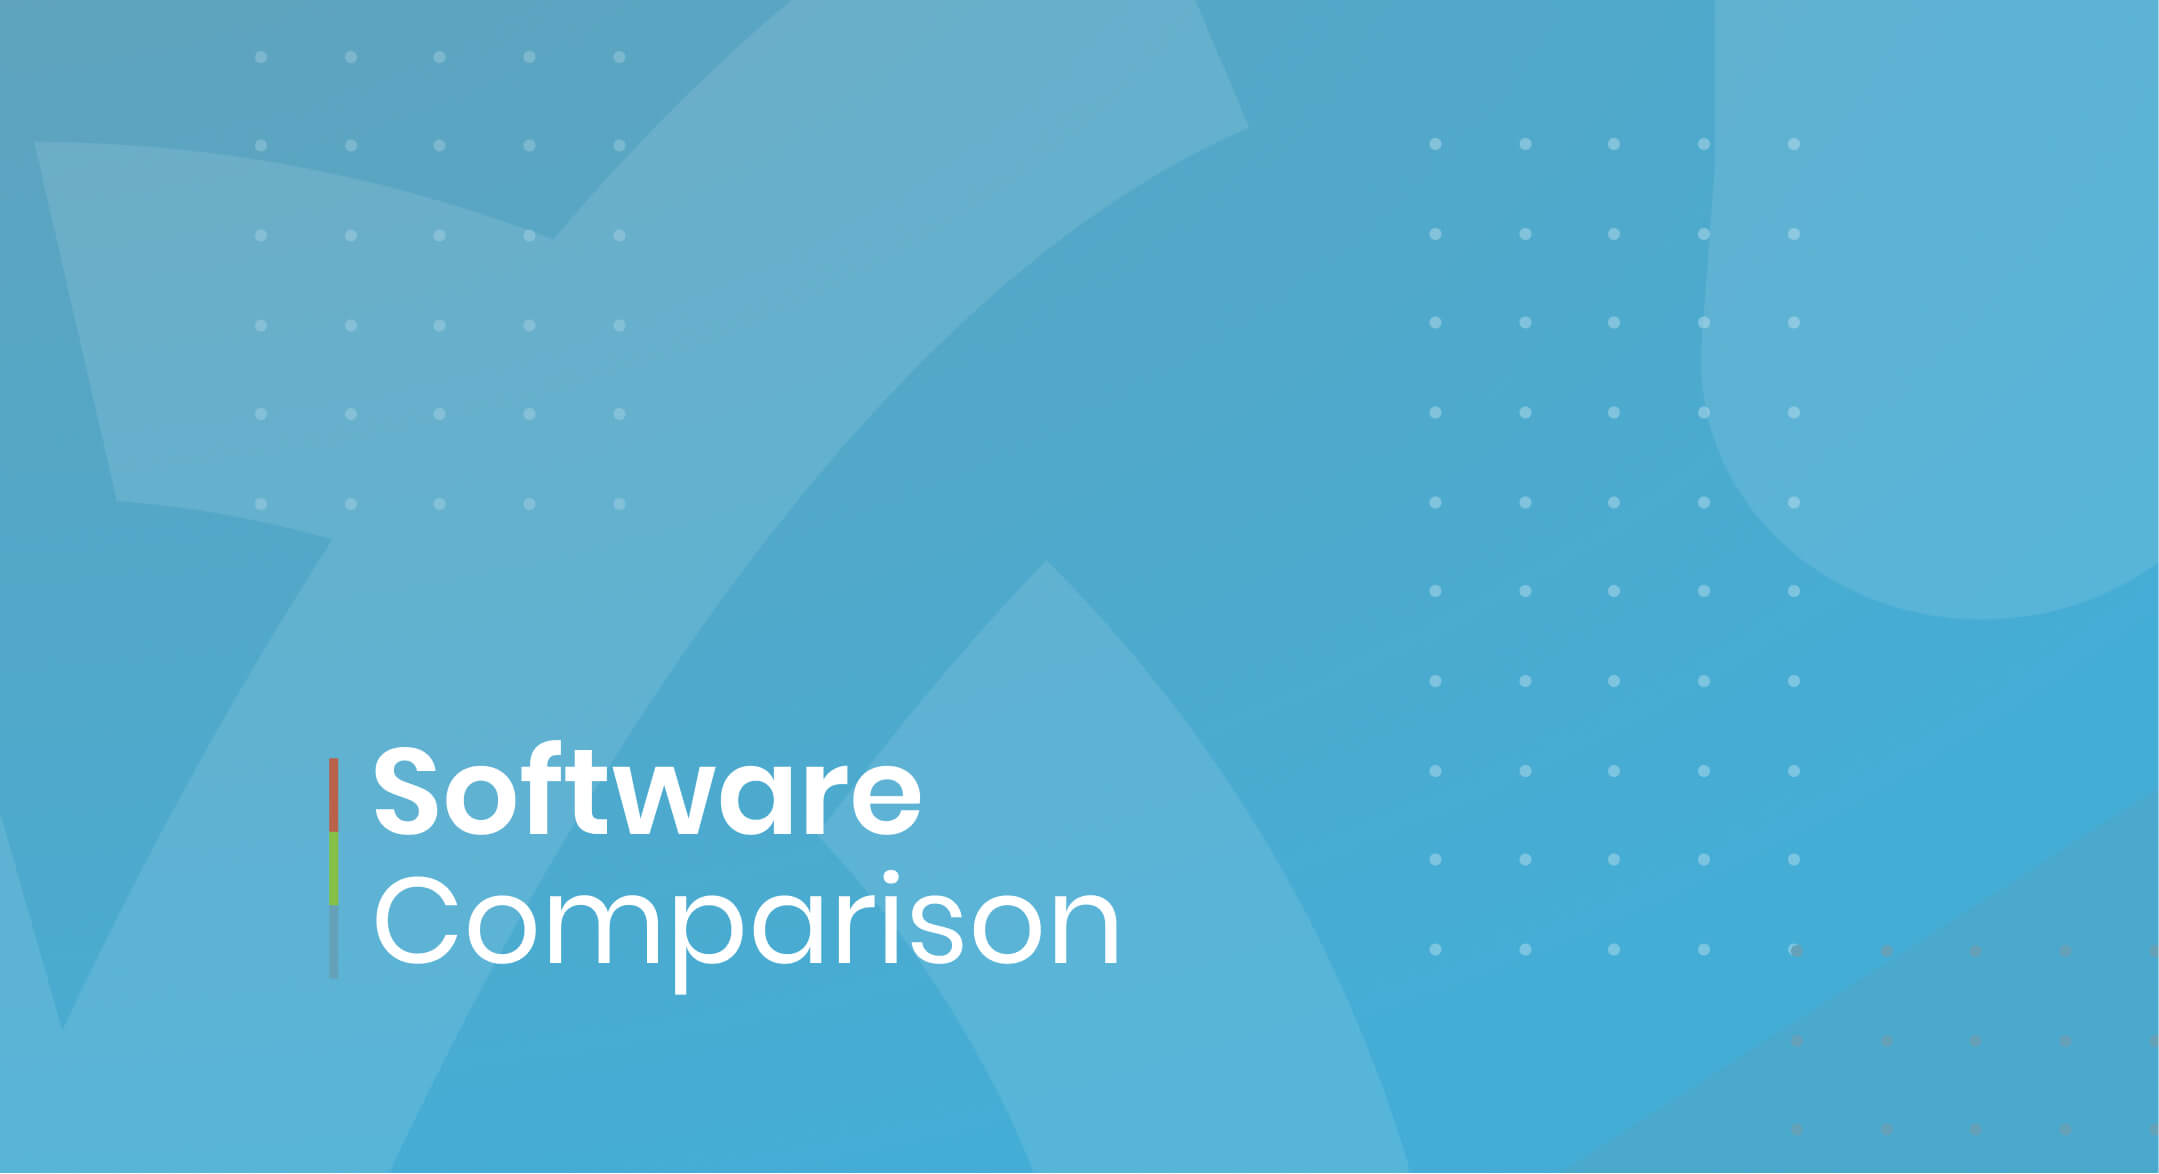 Timely event software comparison banner